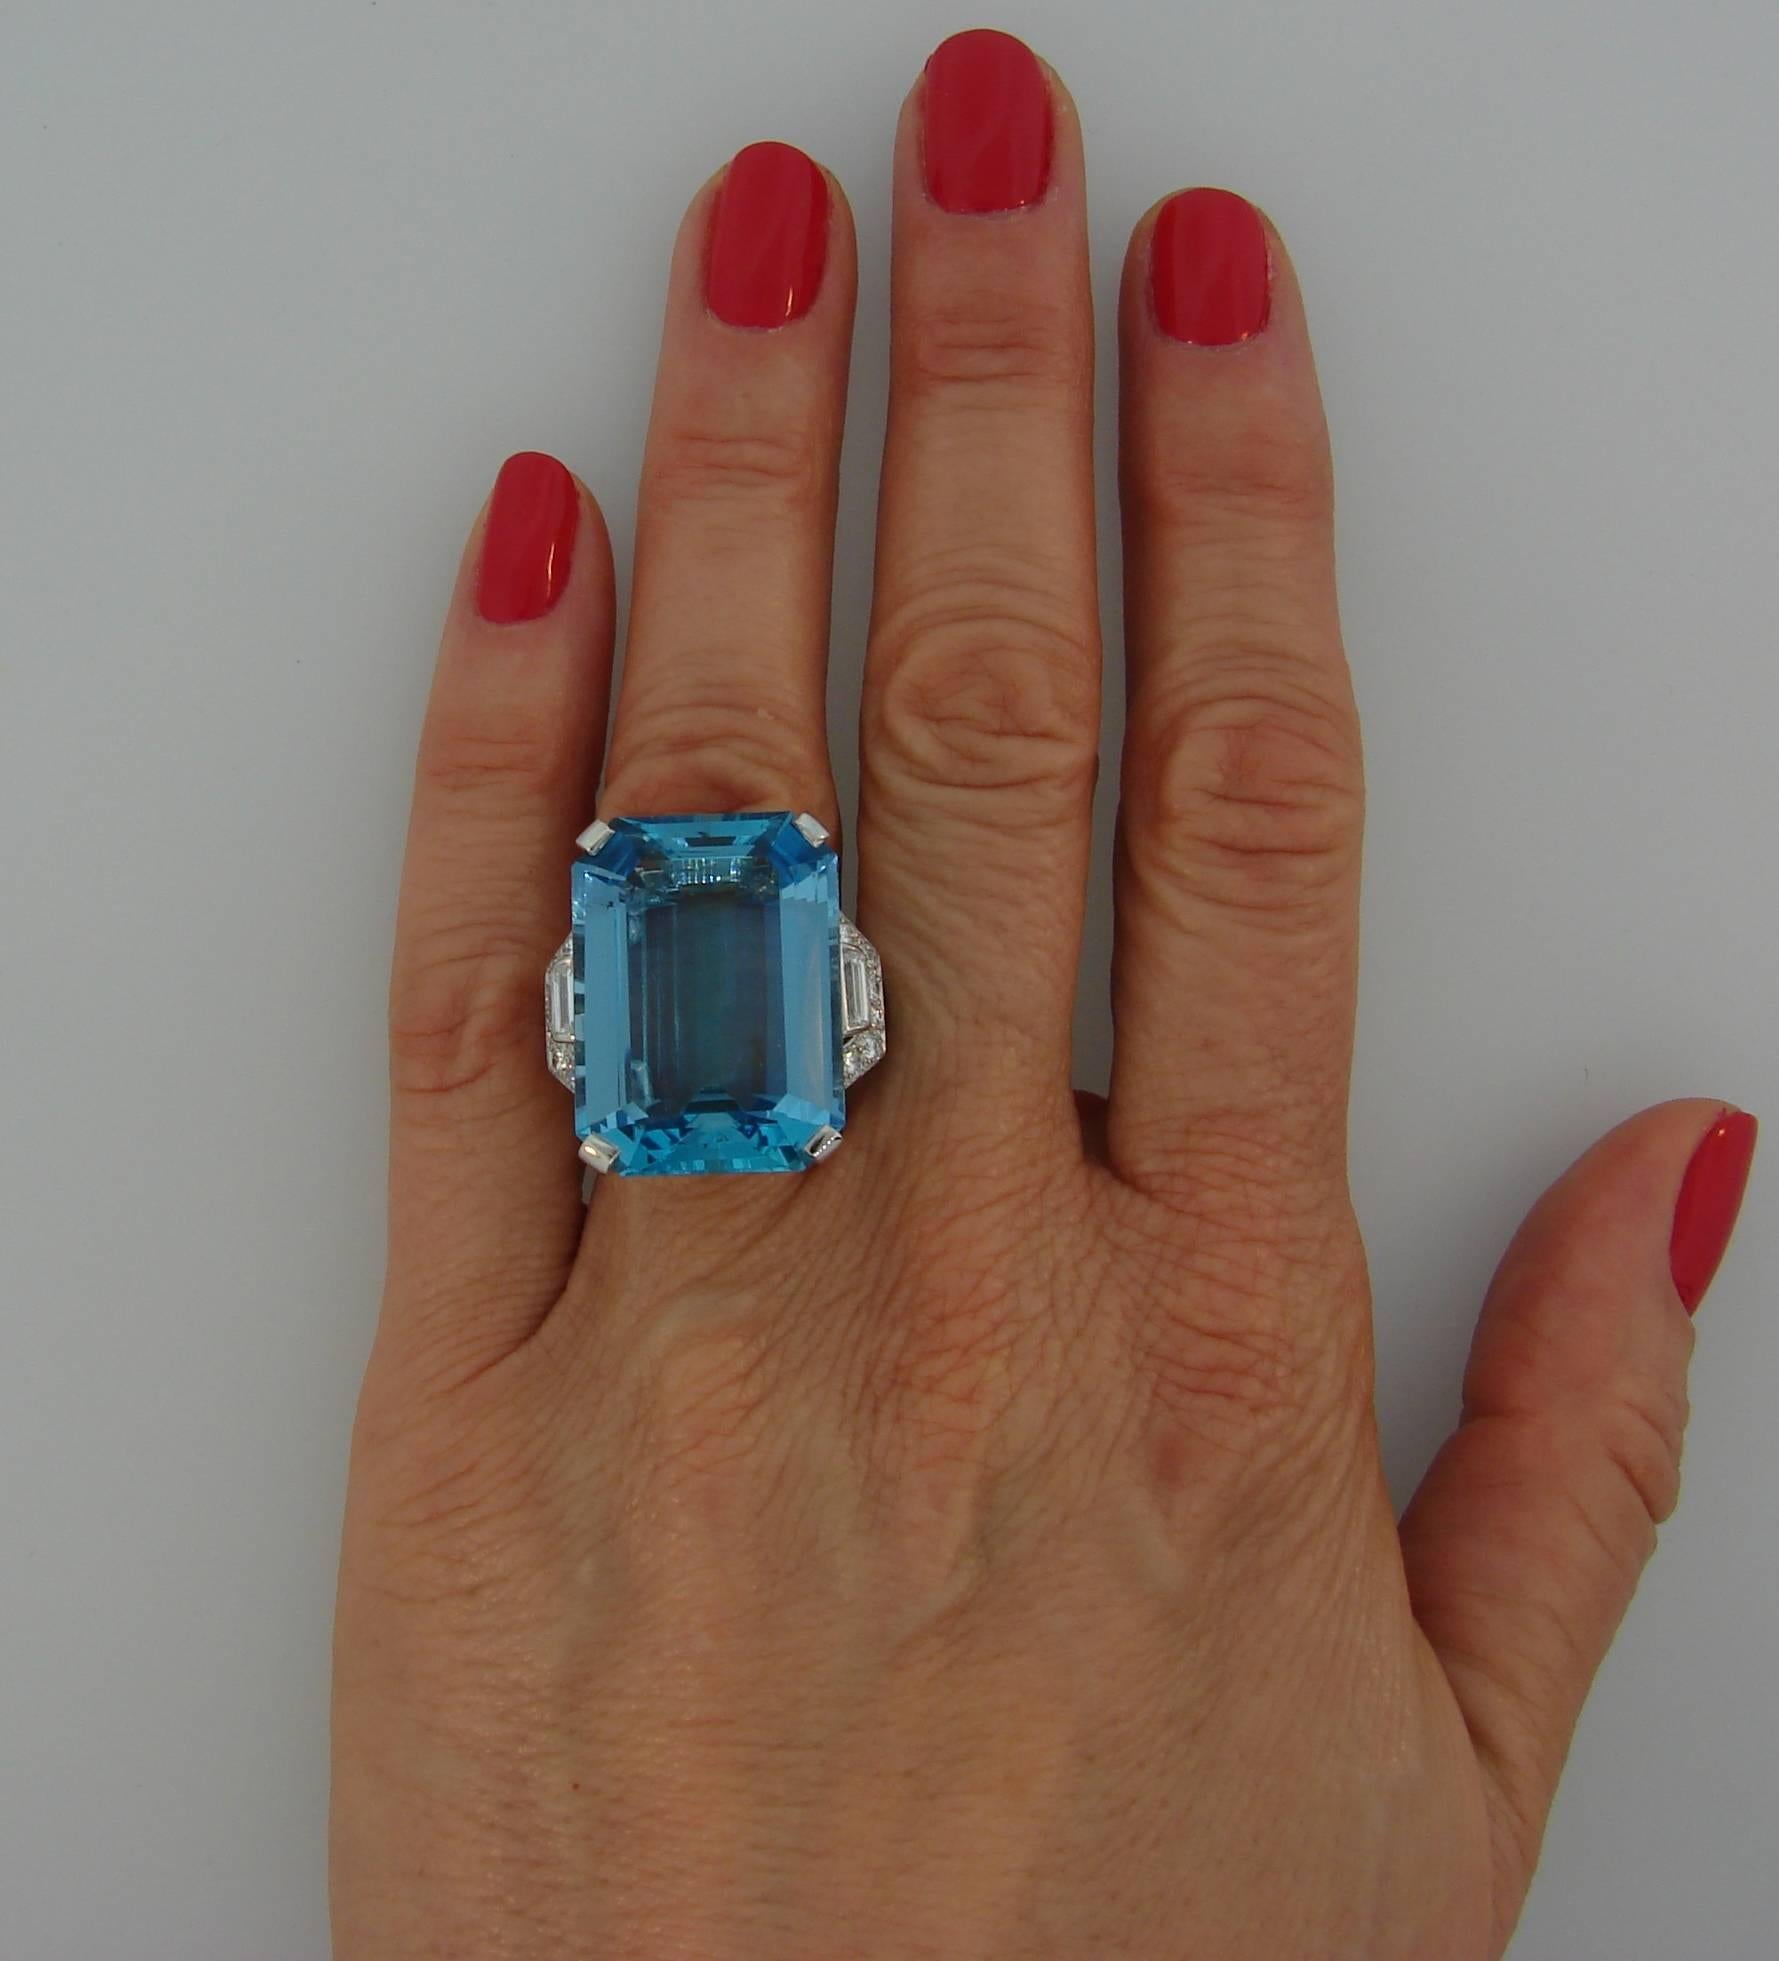 Stunning Art Deco aquamarine cocktail ring created by Asprey in the 1930's. Sensual, elegant and timeless, the ring is a great addition to your jewelry collection. 
Made of platinum, the ring features an emerald cut approximately 37-carat aquamarine